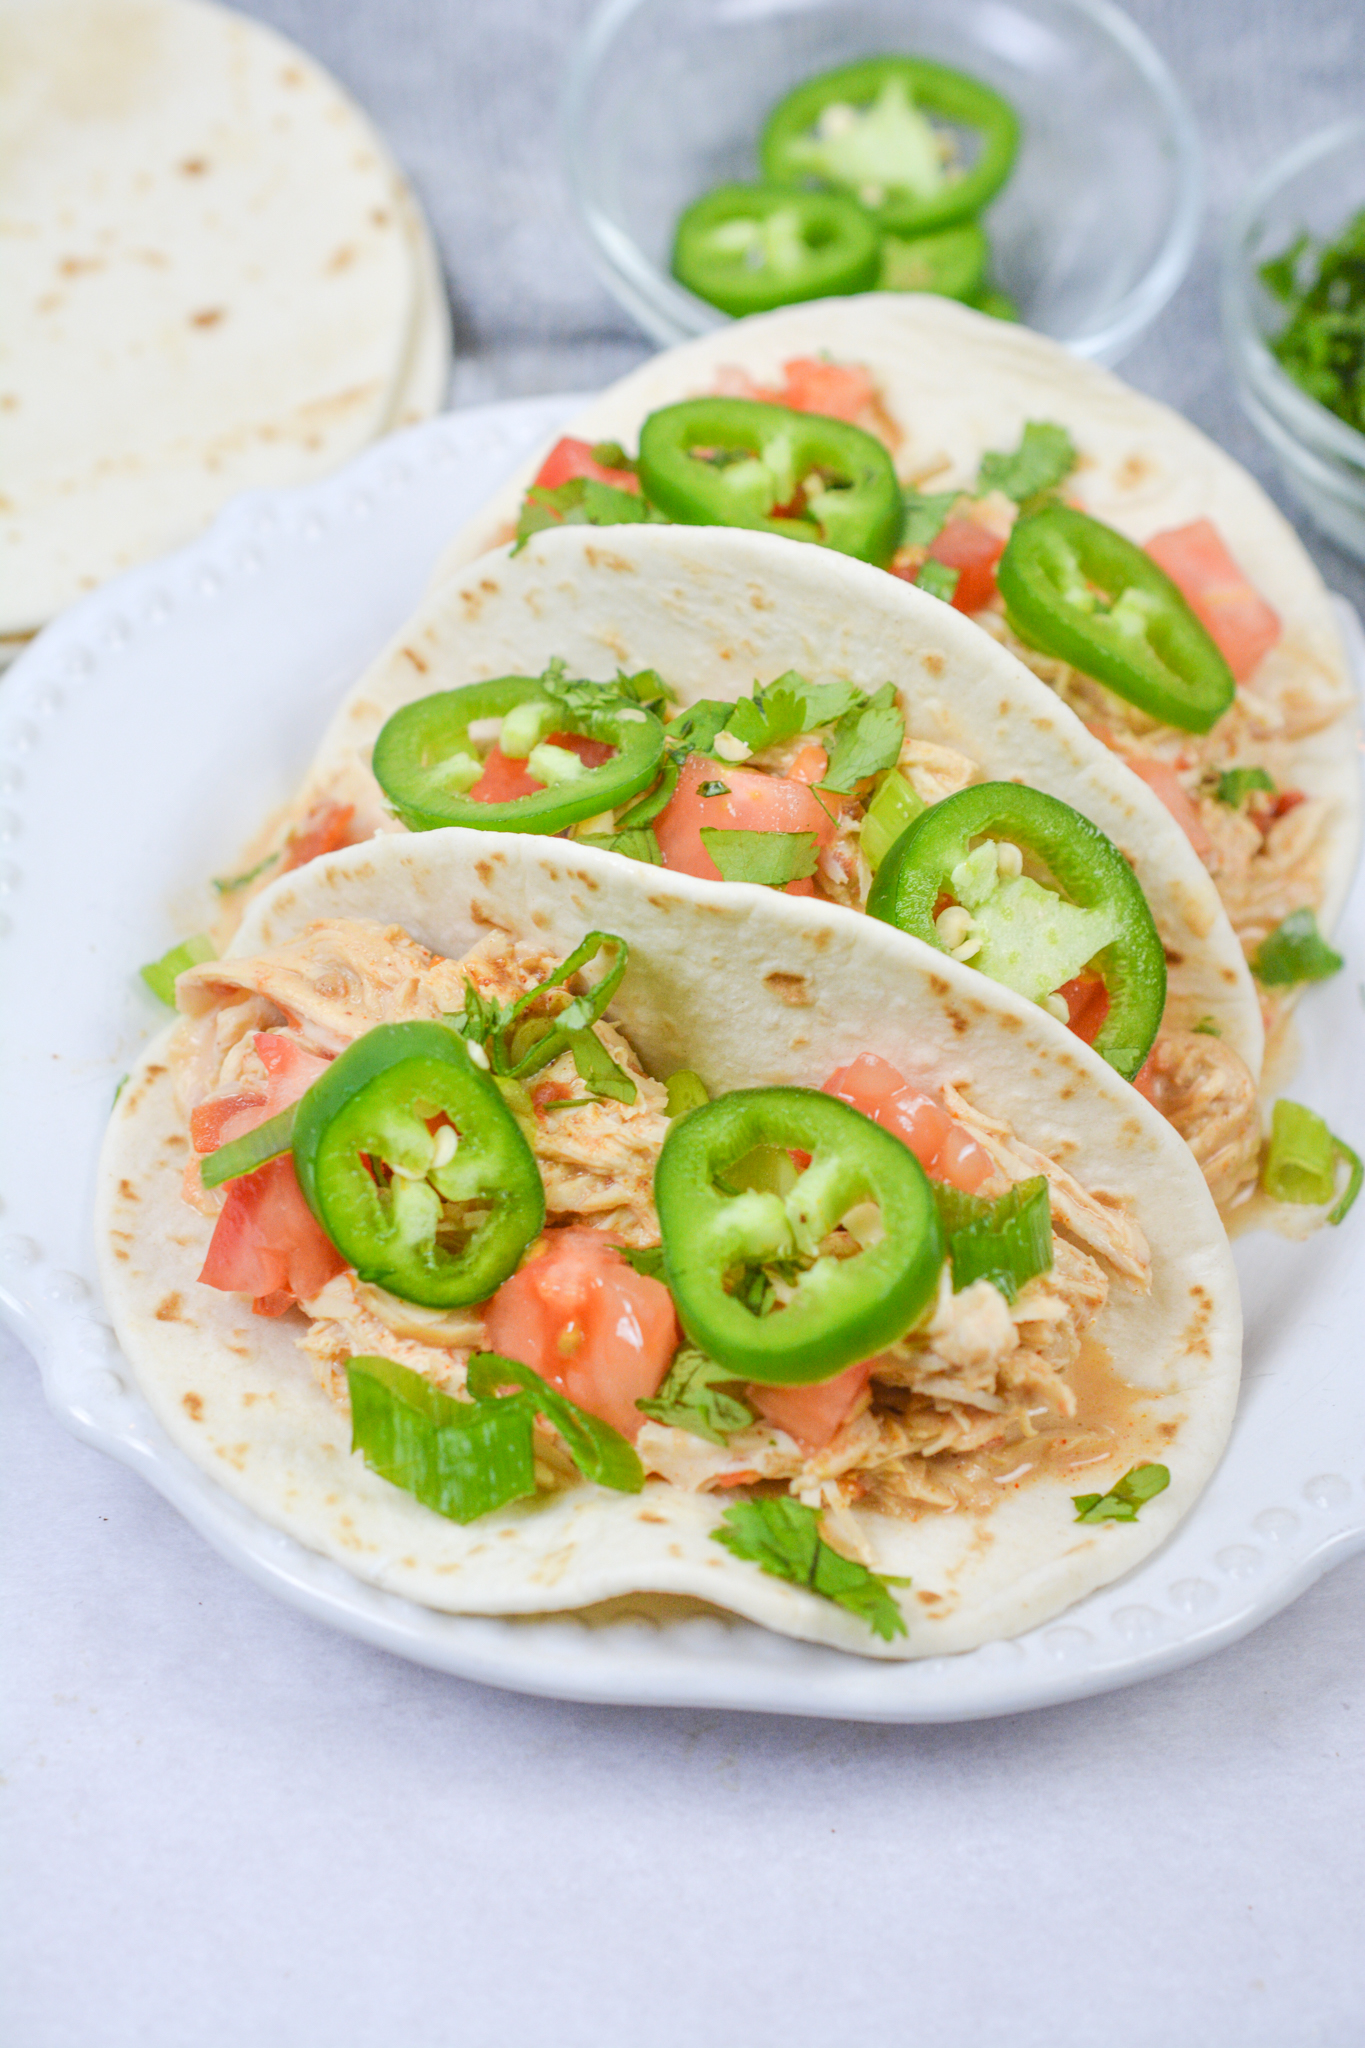 Slow Cooker Queso Chicken Tacos Recipe